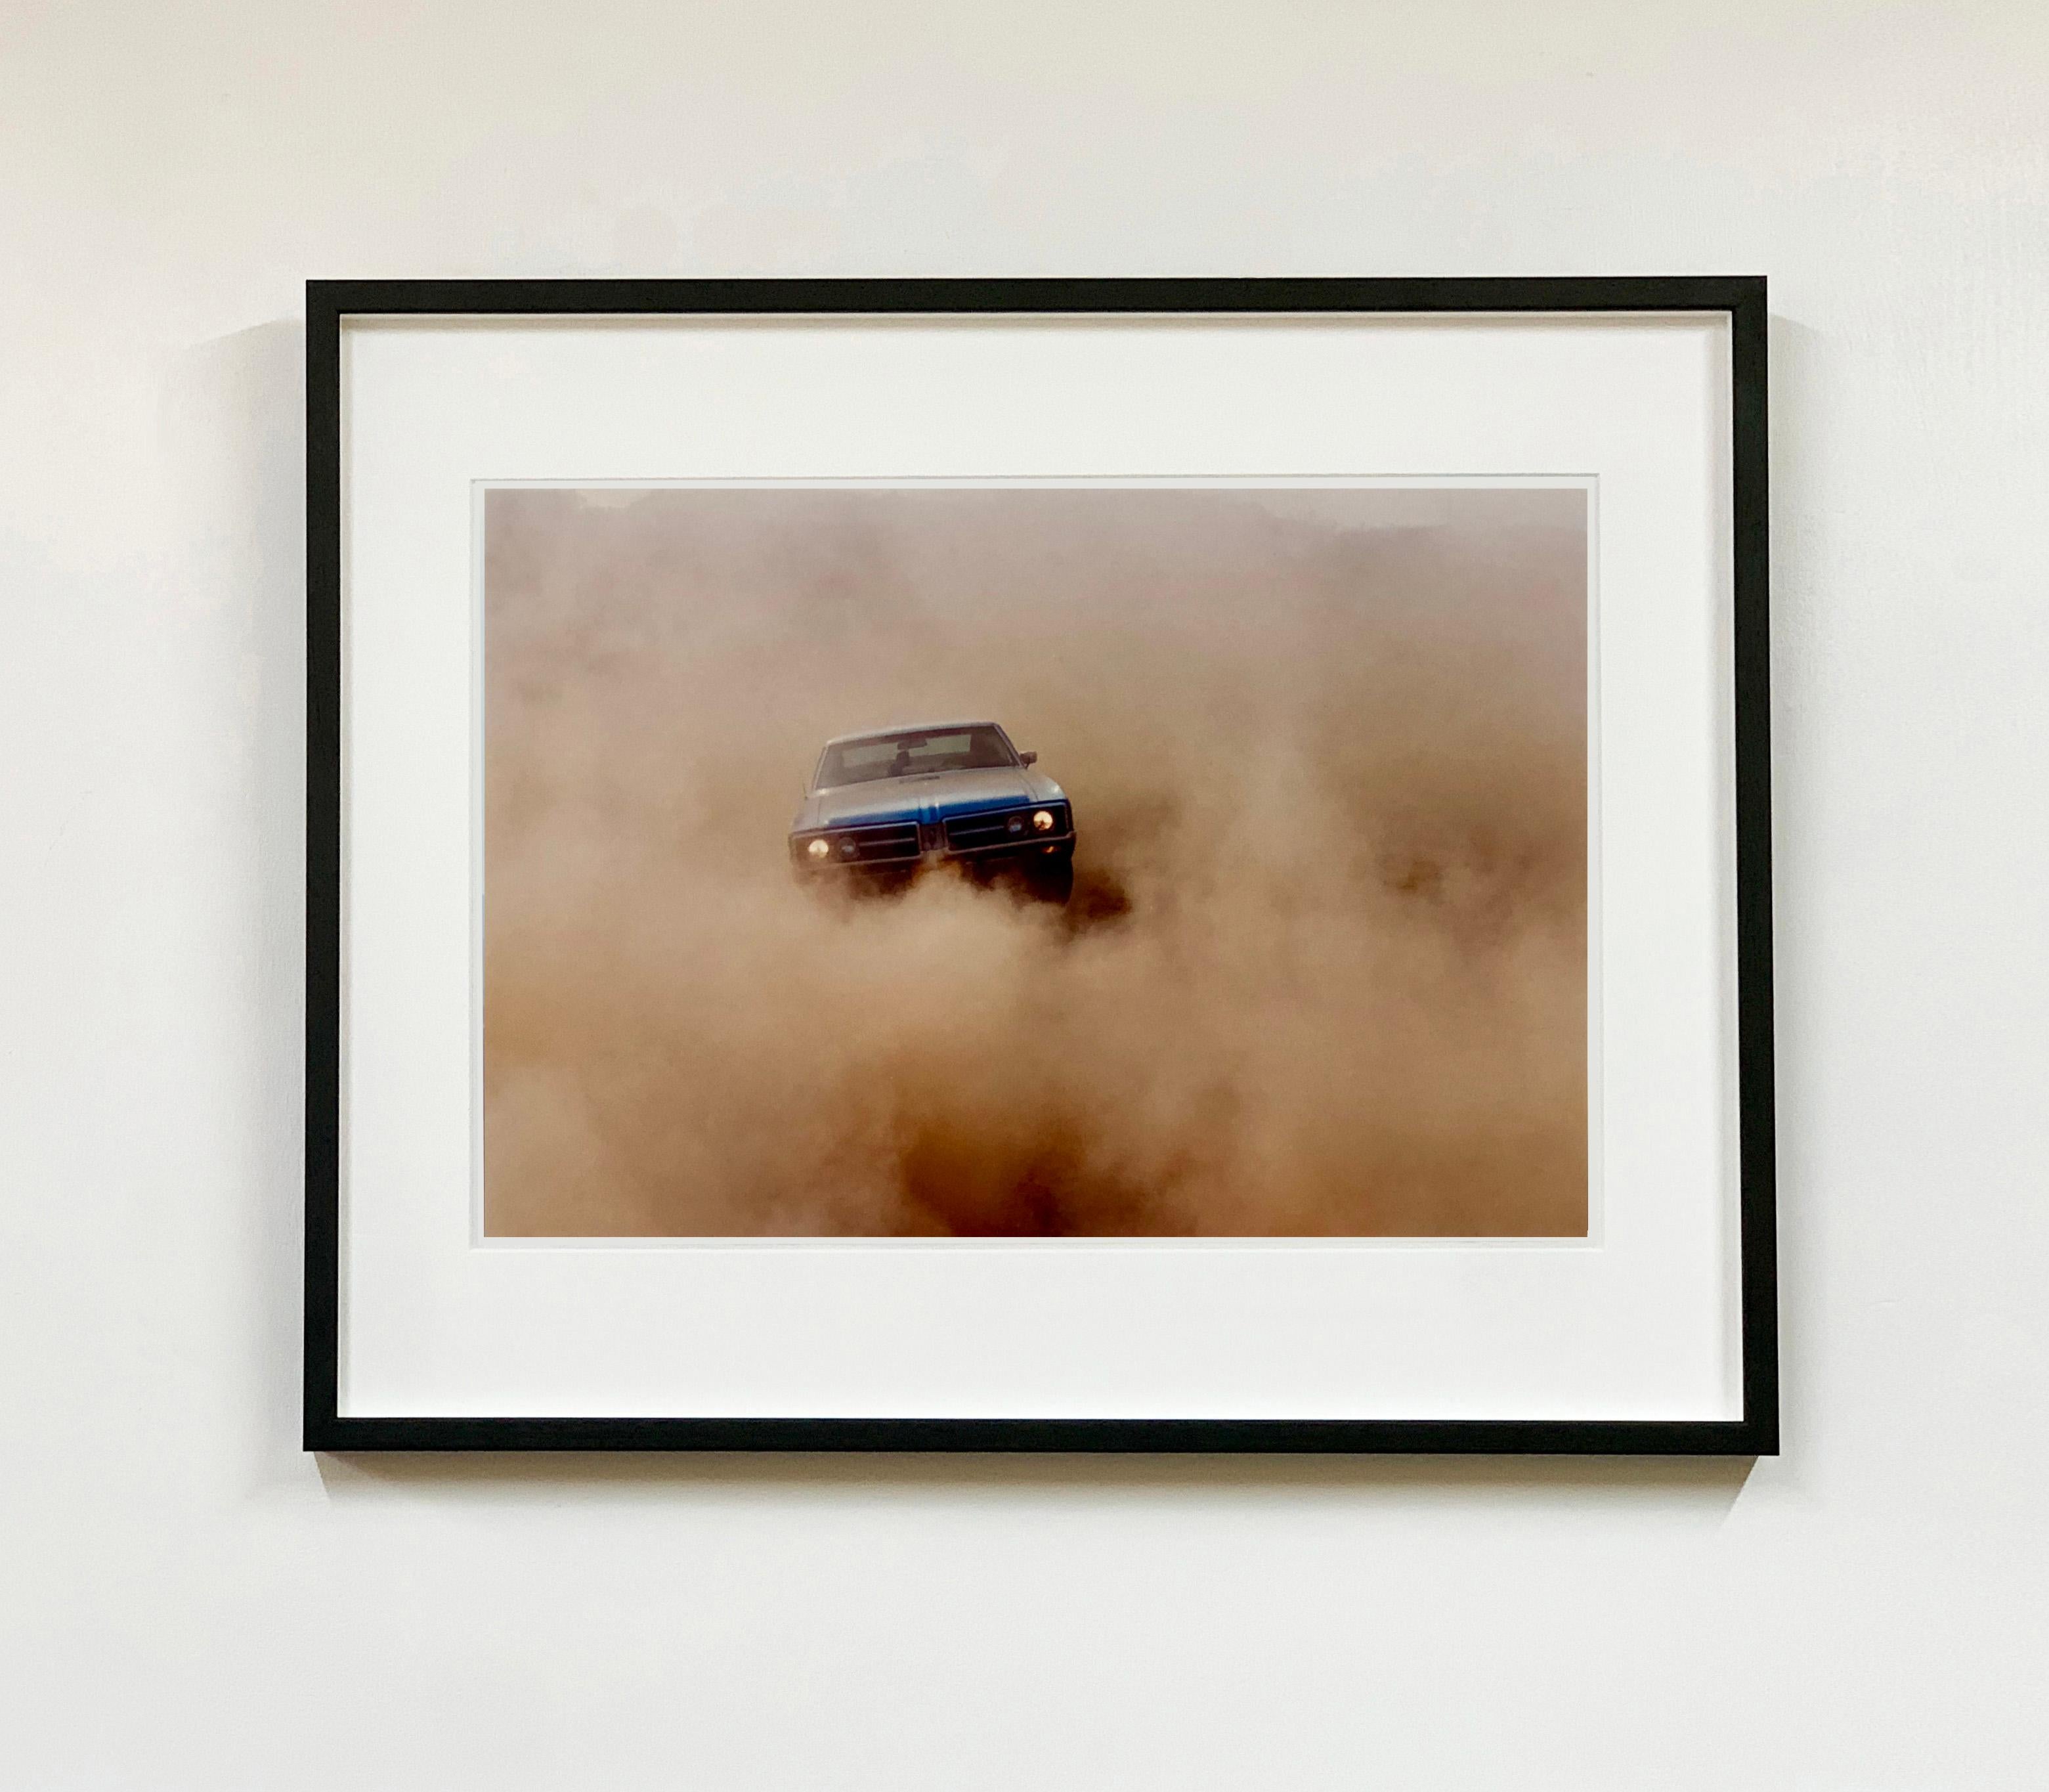 Buick in the Dust, Hemsby, Norfolk - Three Framed Car Color Photographs For Sale 1